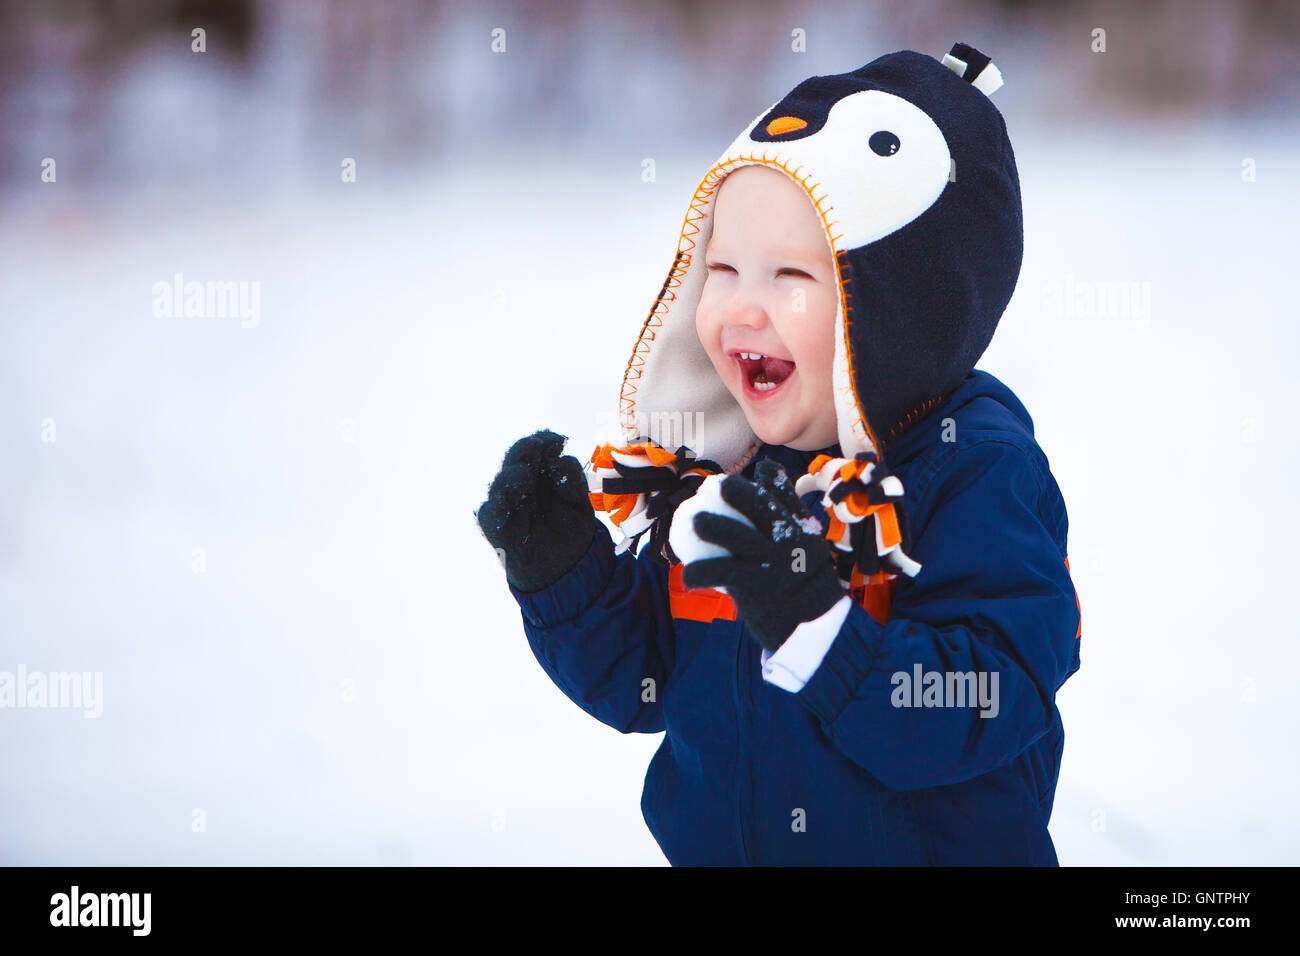 A young boy wearing a winter coat and hat laughs as he plays in the snow. Stock Photo